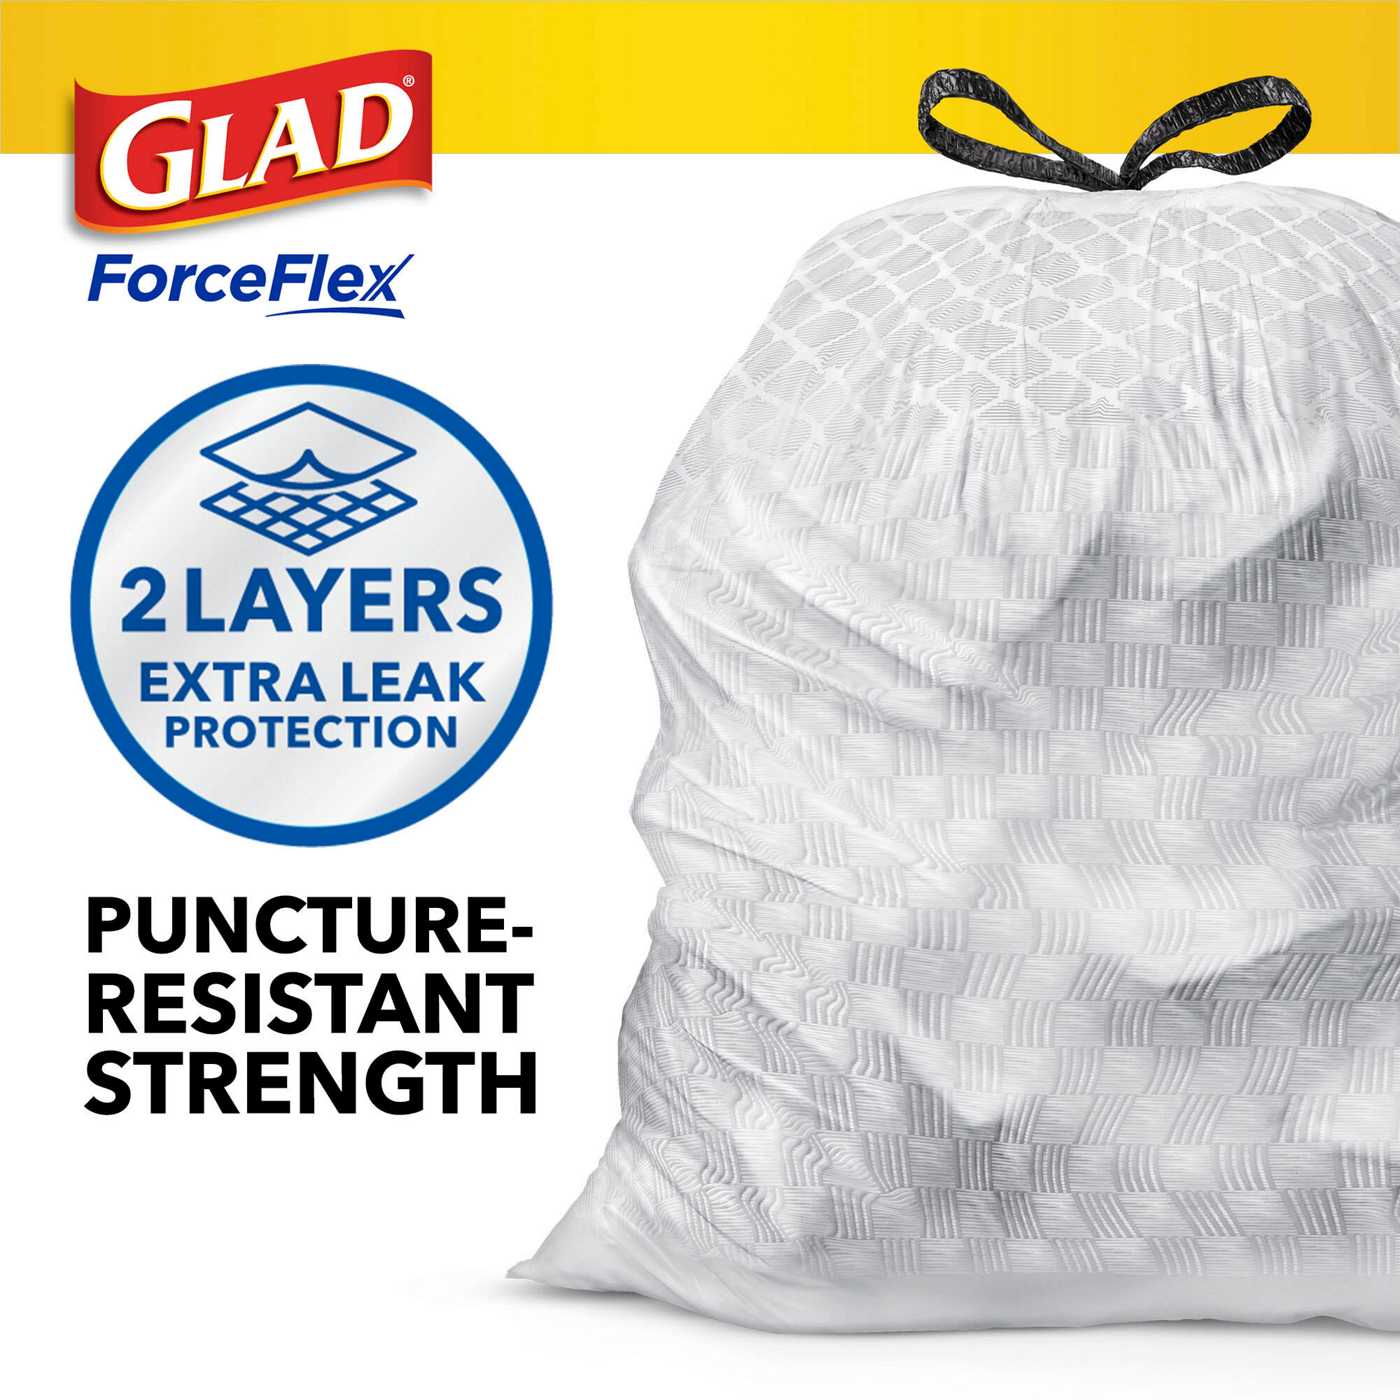 Glad ForceFlex Tall Kitchen Drawstring Trash Bags, 13 Gallon - Fresh Clean Scent with Febreeze Freshness; image 2 of 9